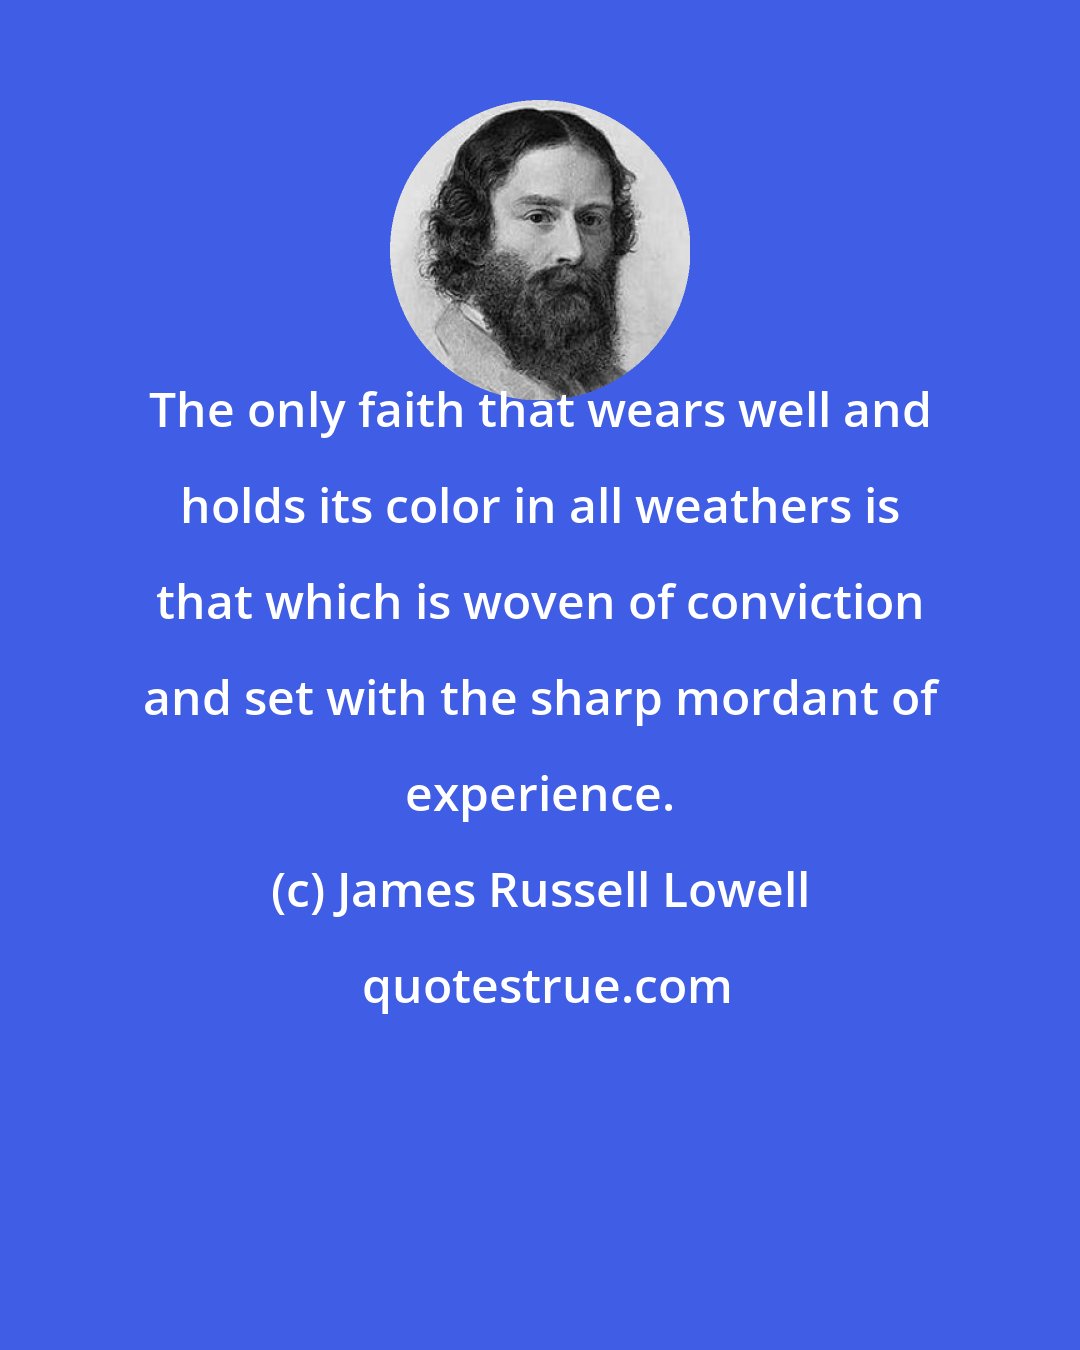 James Russell Lowell: The only faith that wears well and holds its color in all weathers is that which is woven of conviction and set with the sharp mordant of experience.